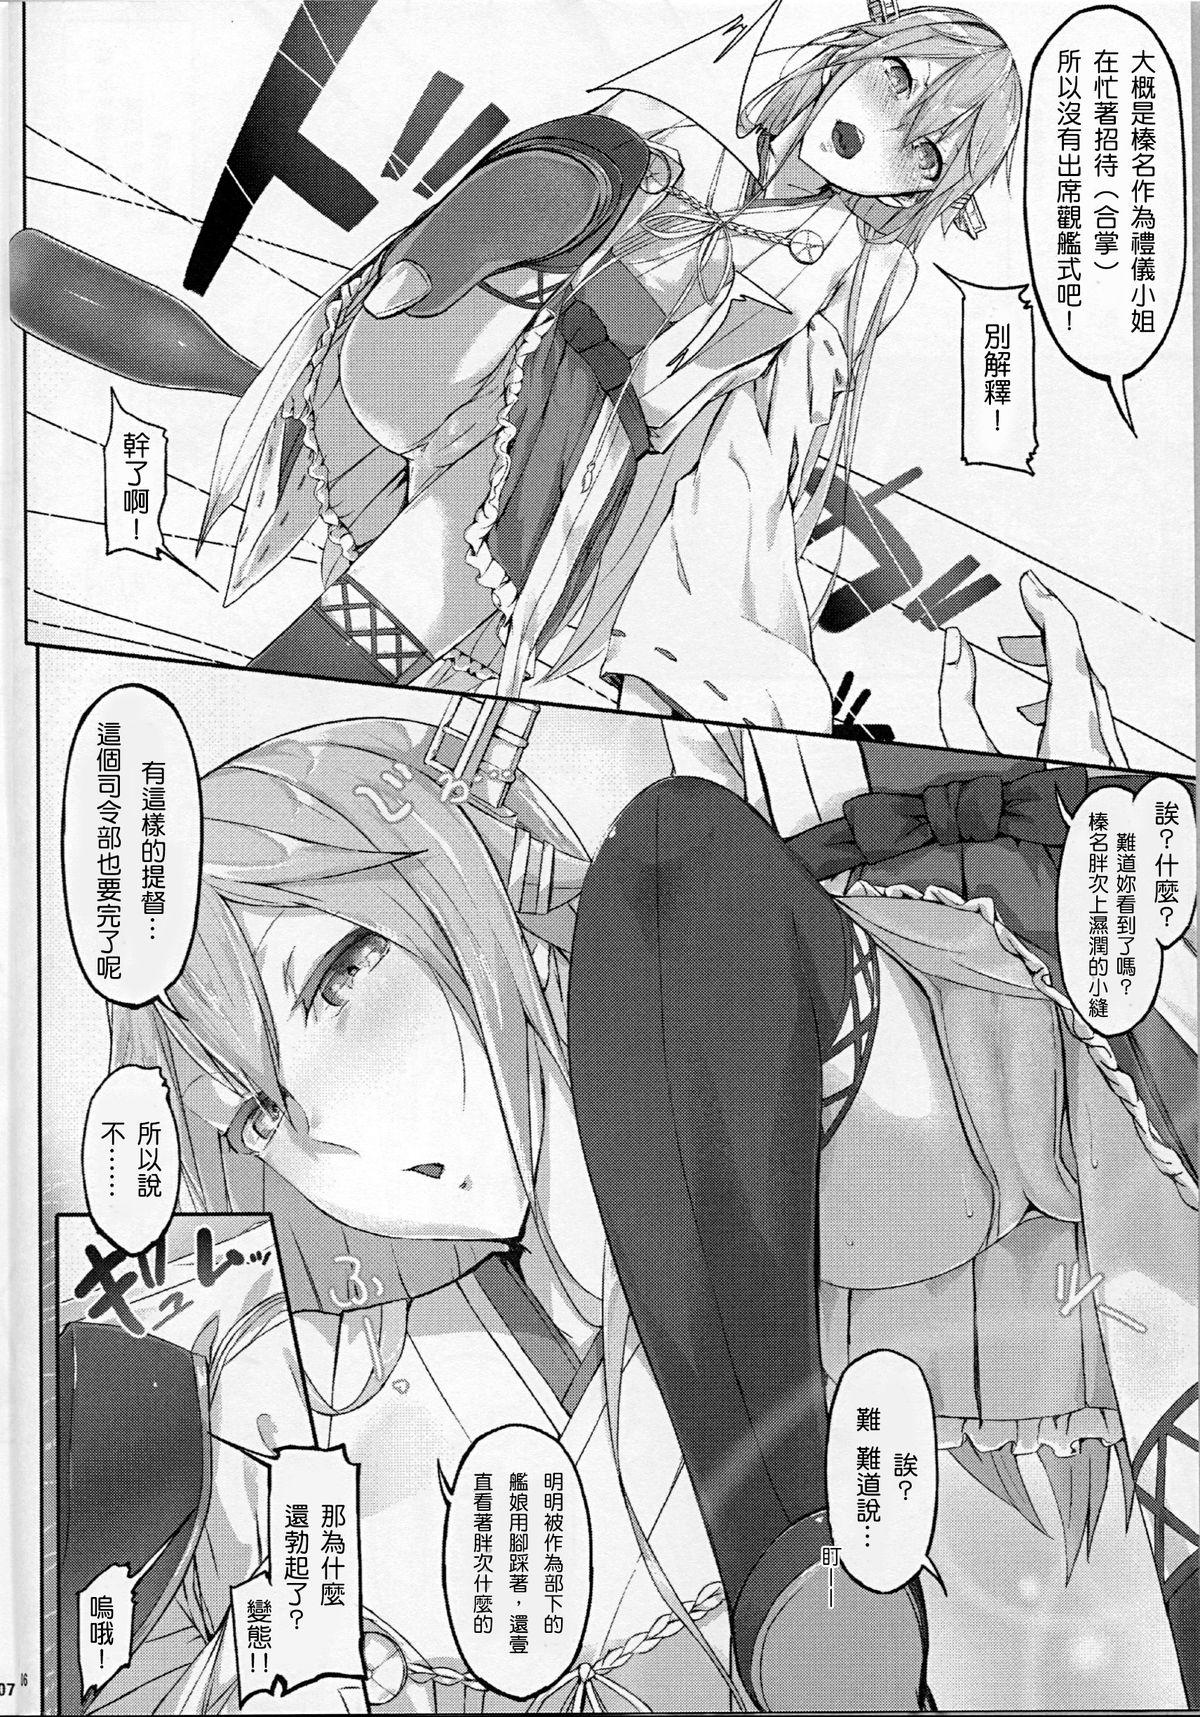 Tugjob Fleet Girls Pack vol. 1 - Kantai collection Cei - Page 6